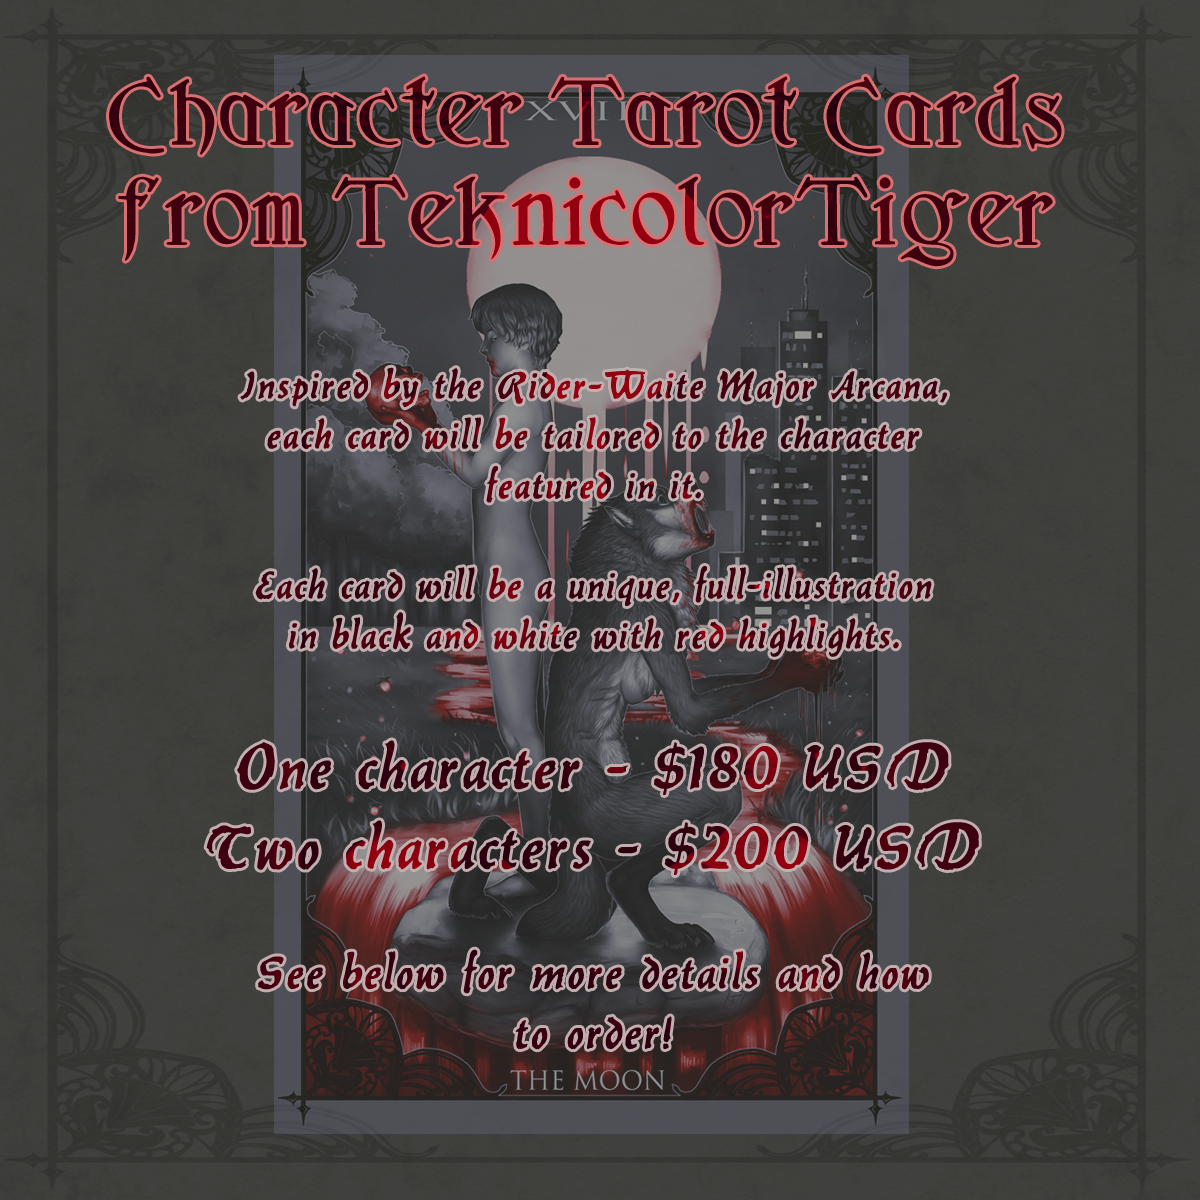 Now Open For Character Tarot Card Commissions!